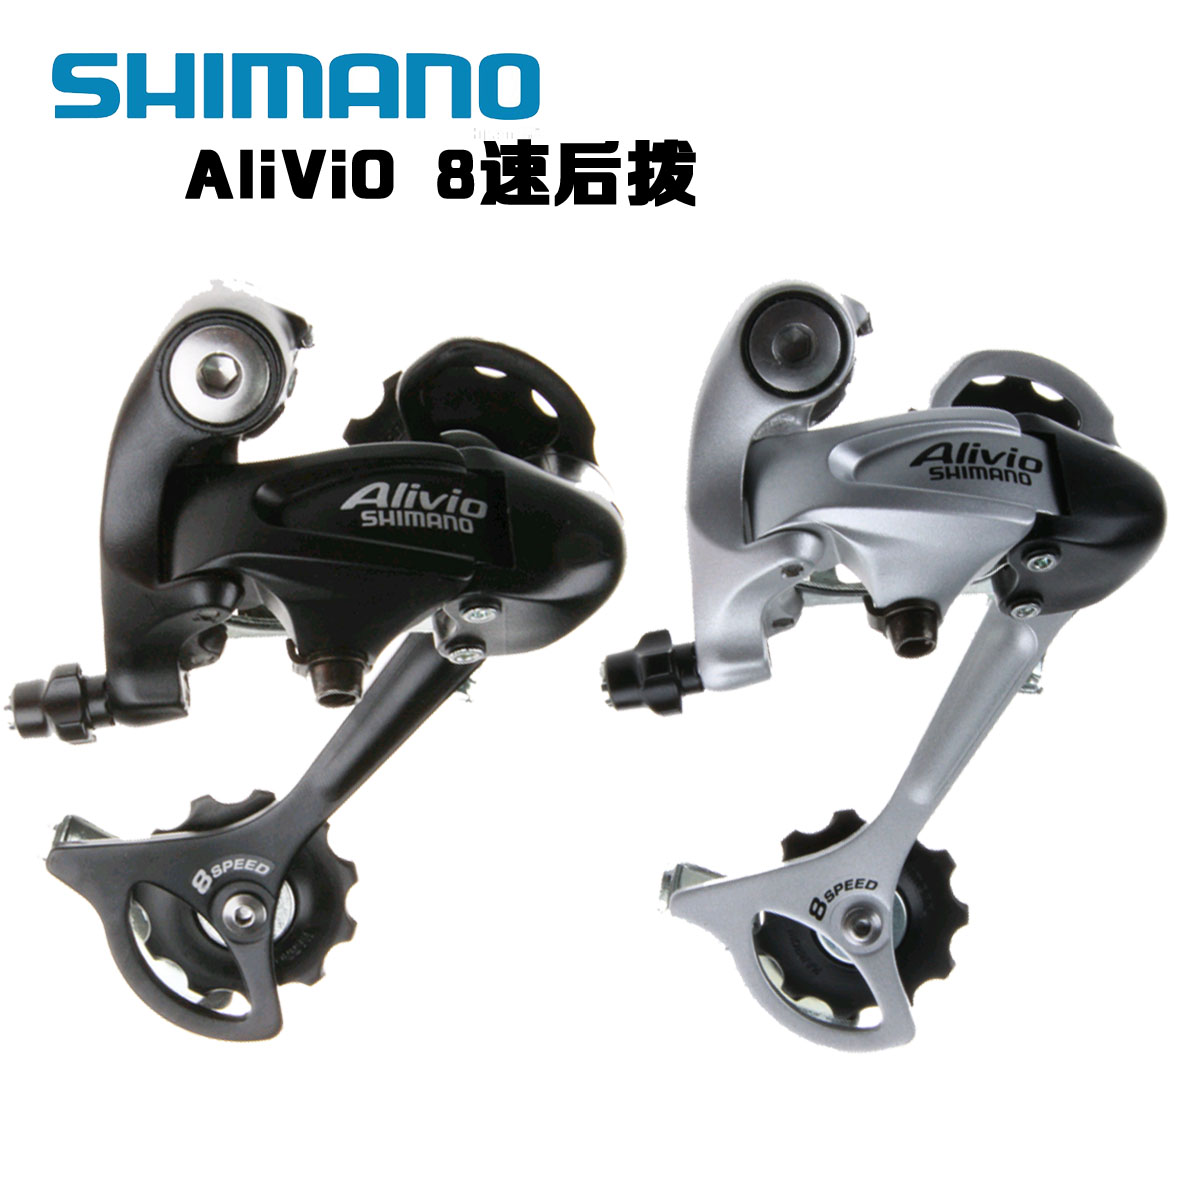 aanval shampoo vermomming 18.60] SHIMANO ALIVIO RD-M410 MC20 after 8/24 speed mountain bike after 8  speed from best taobao agent ,taobao international,international ecommerce  newbecca.com